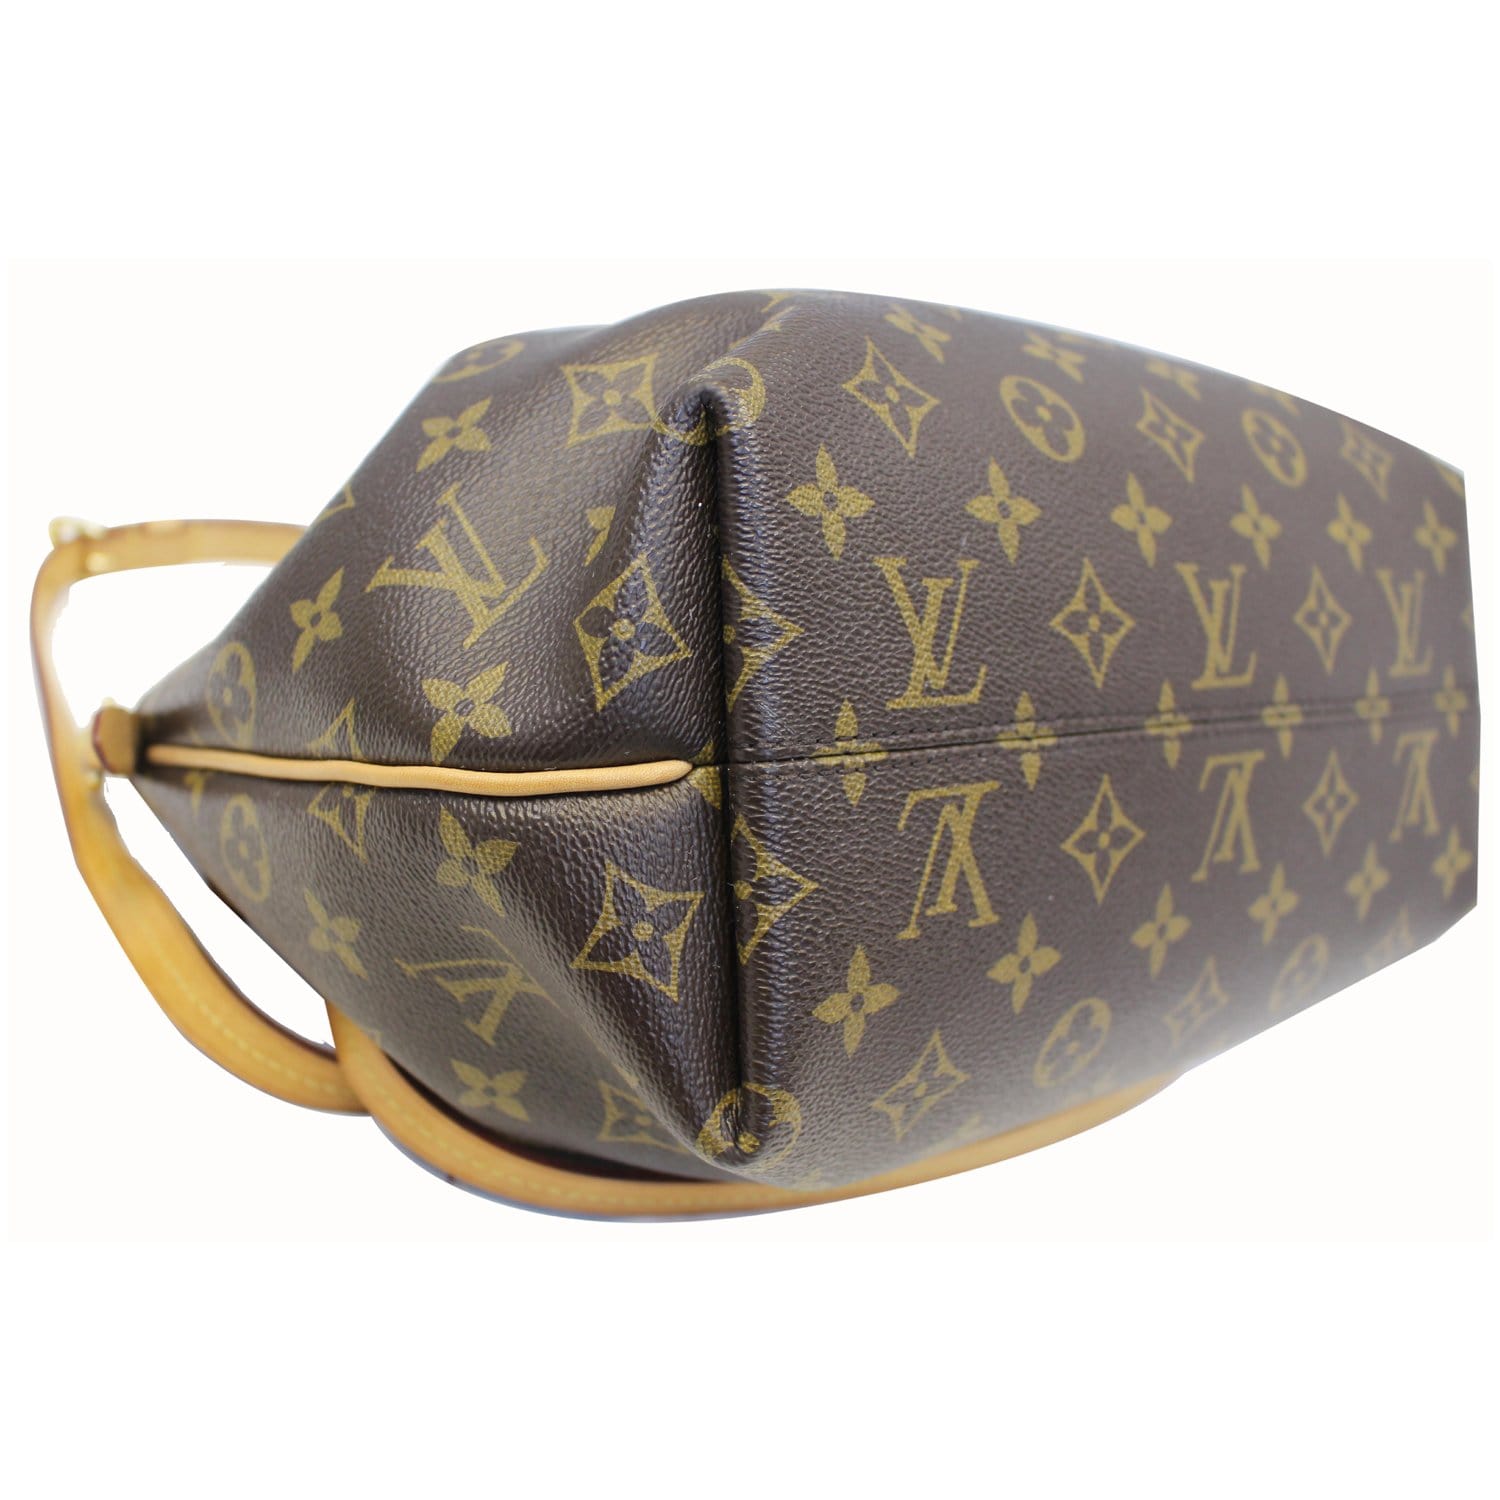 Louis Vuitton 2015 pre-owned Turenne PM two-way Bag - Farfetch